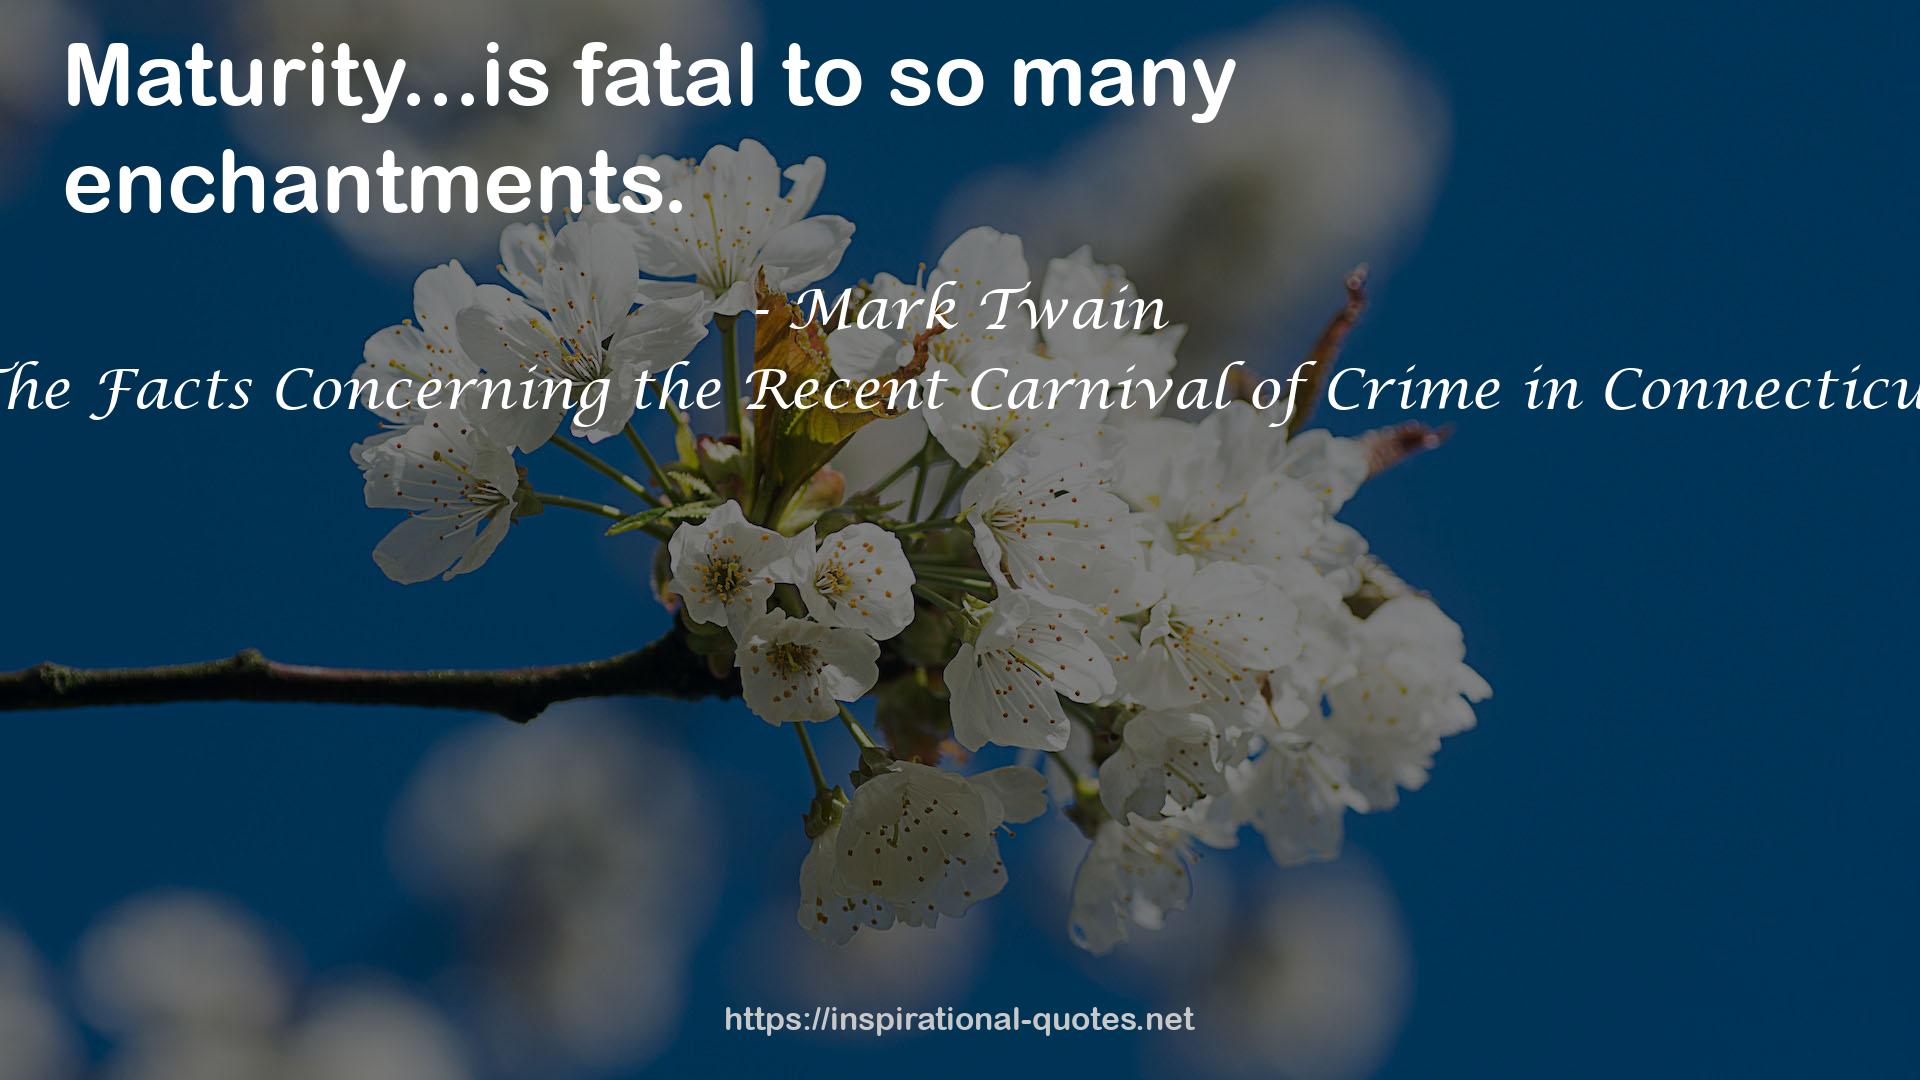 The Facts Concerning the Recent Carnival of Crime in Connecticut QUOTES